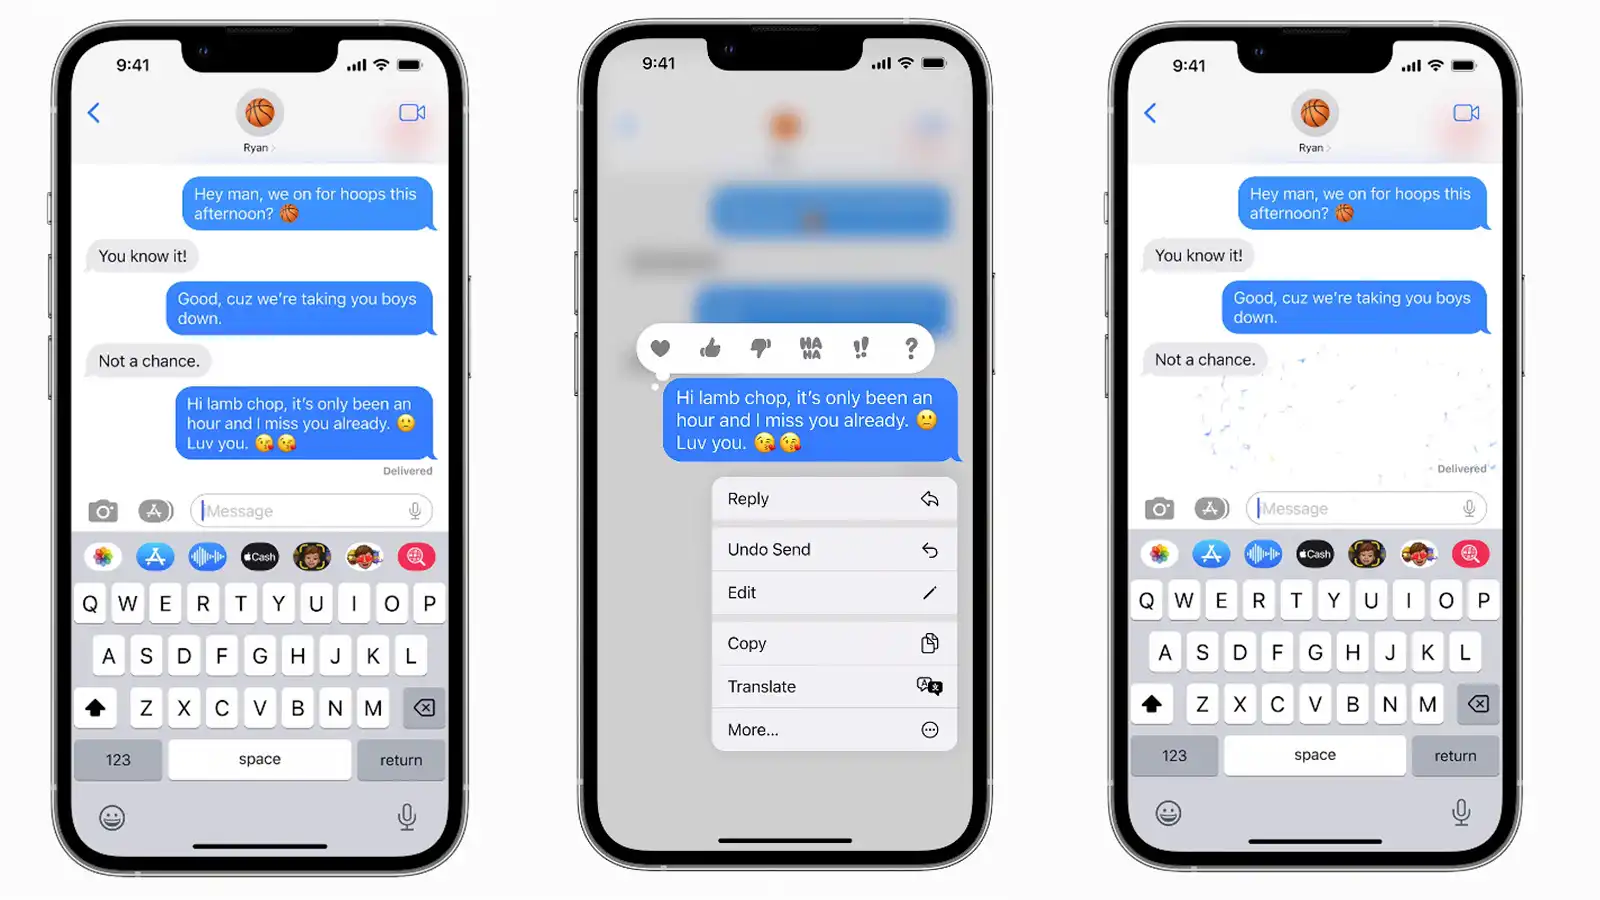 How to Unsend and Edit Messages on an iPhone